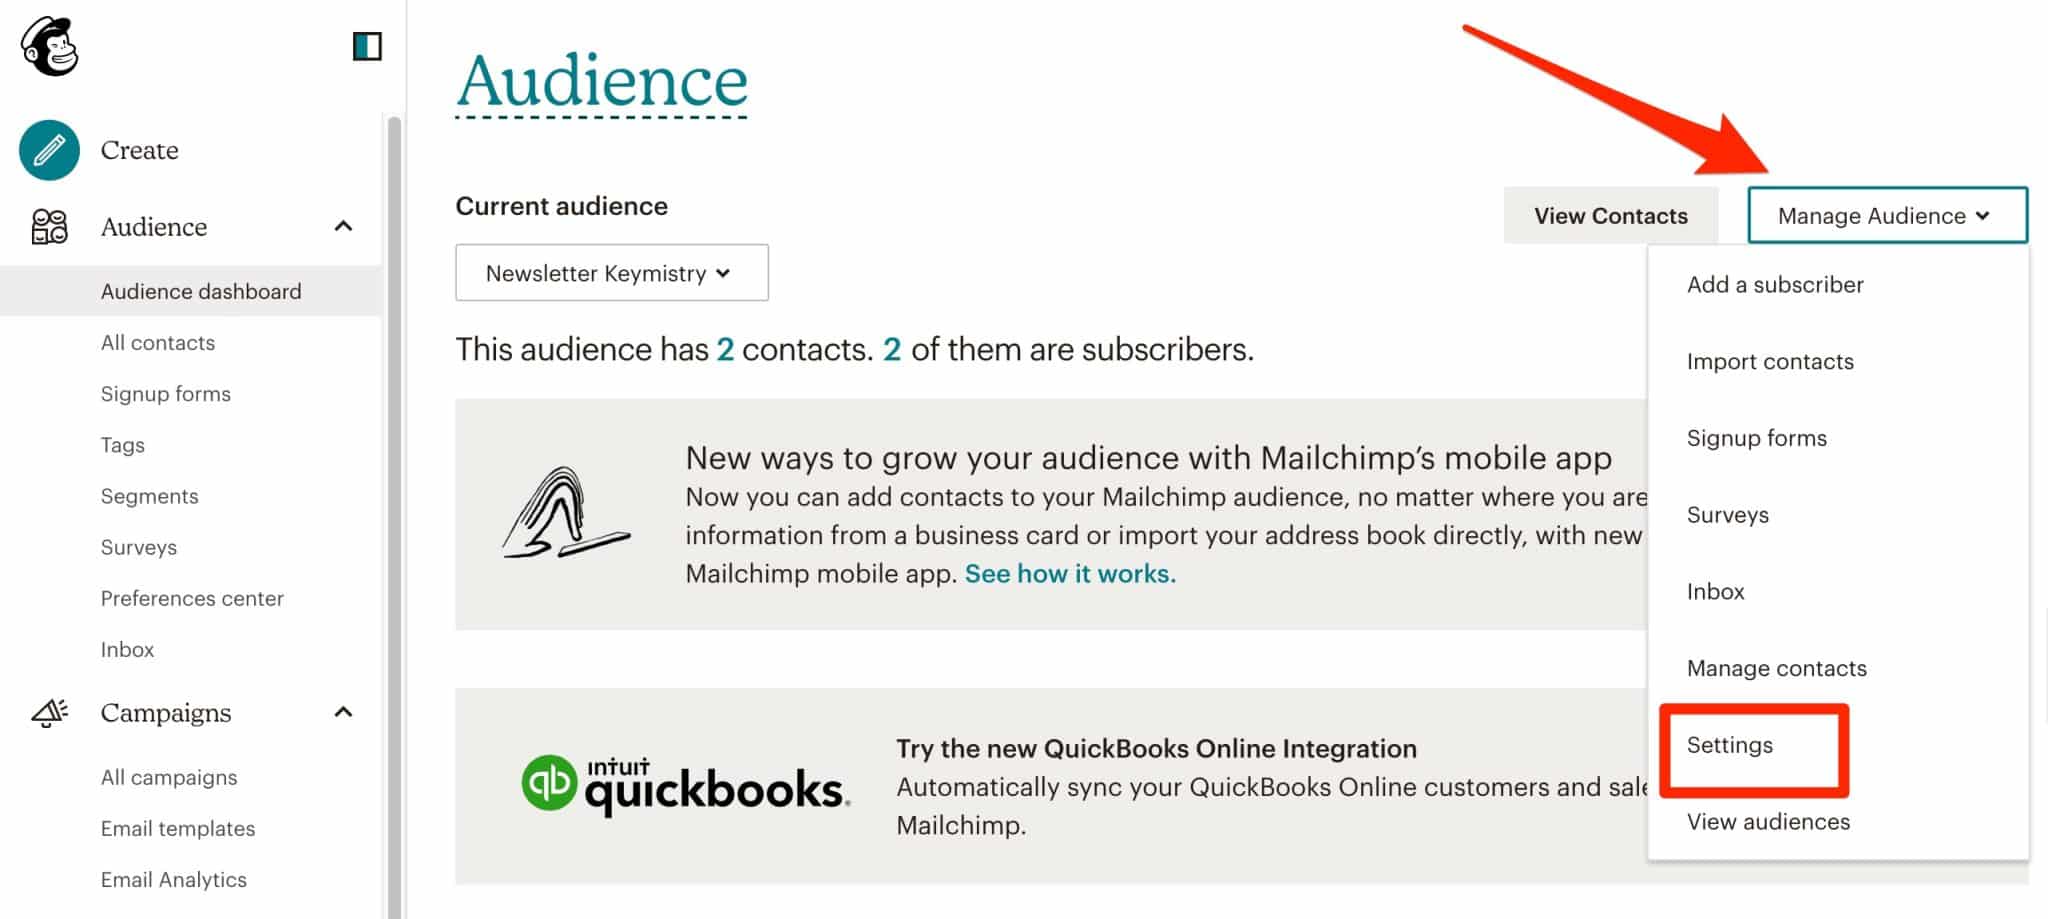 Manage your audience on Mailchimp.